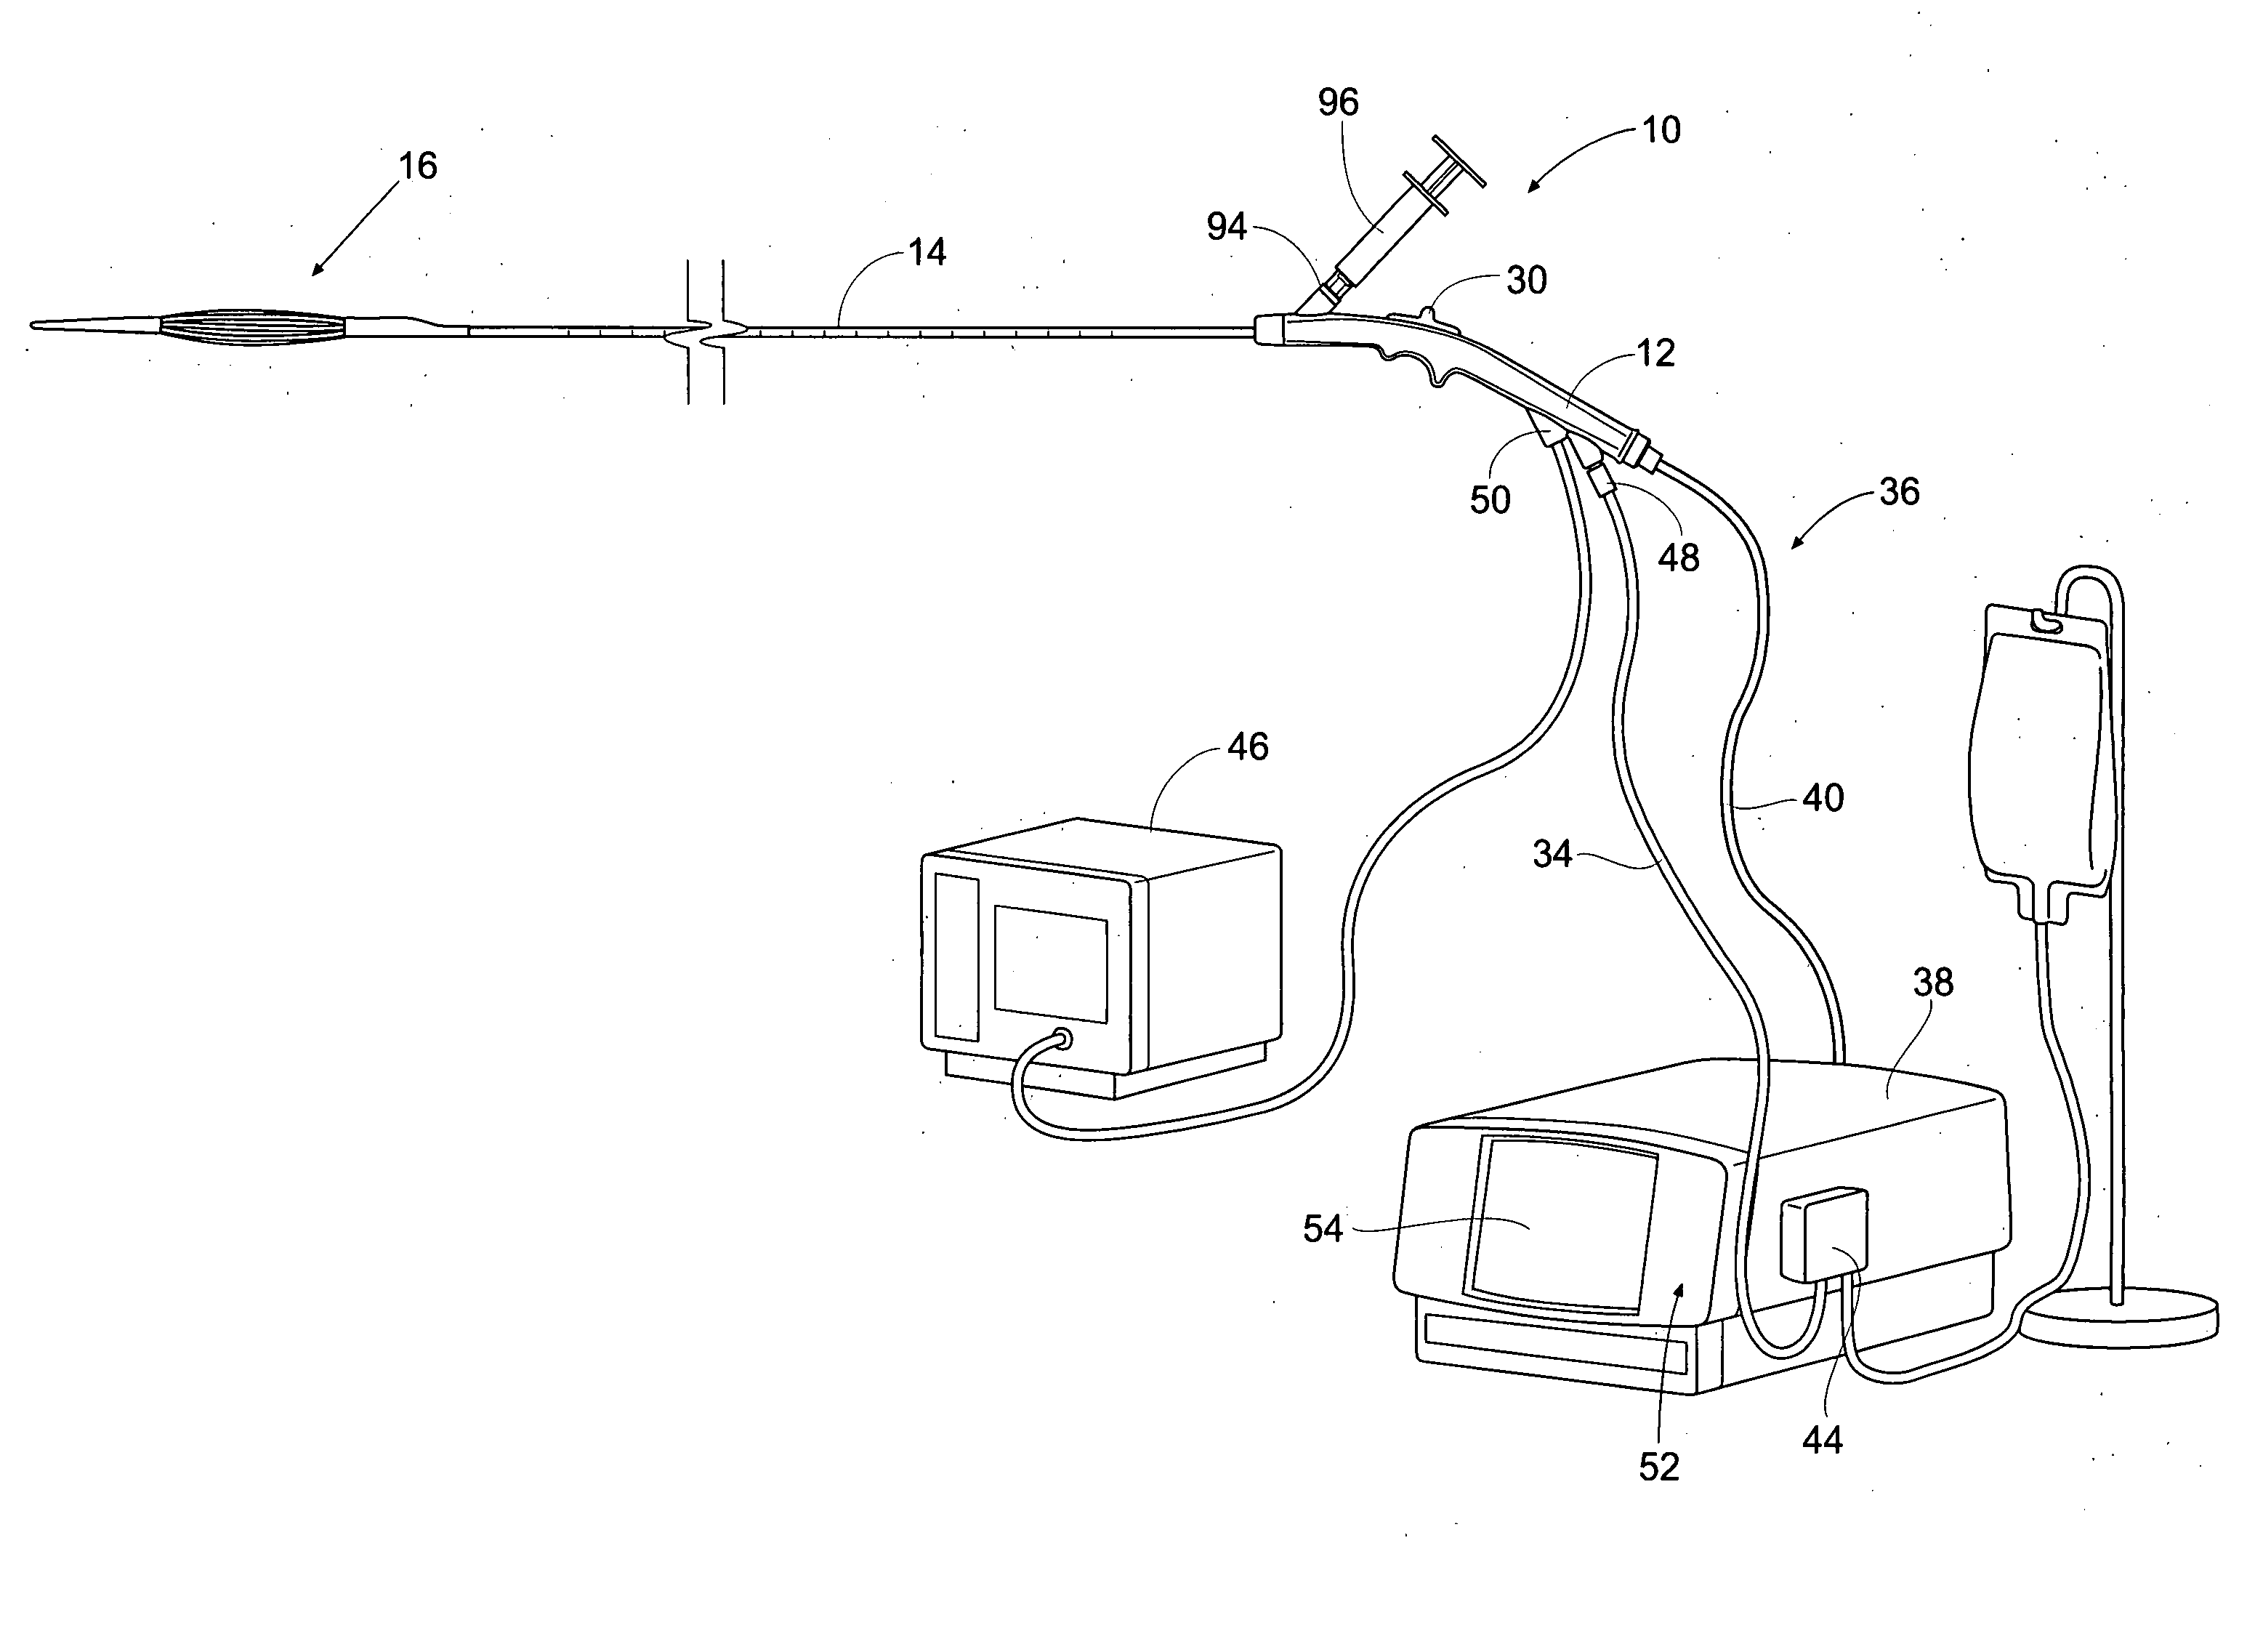 Devices, systems and methods for treating tissue regions of the body